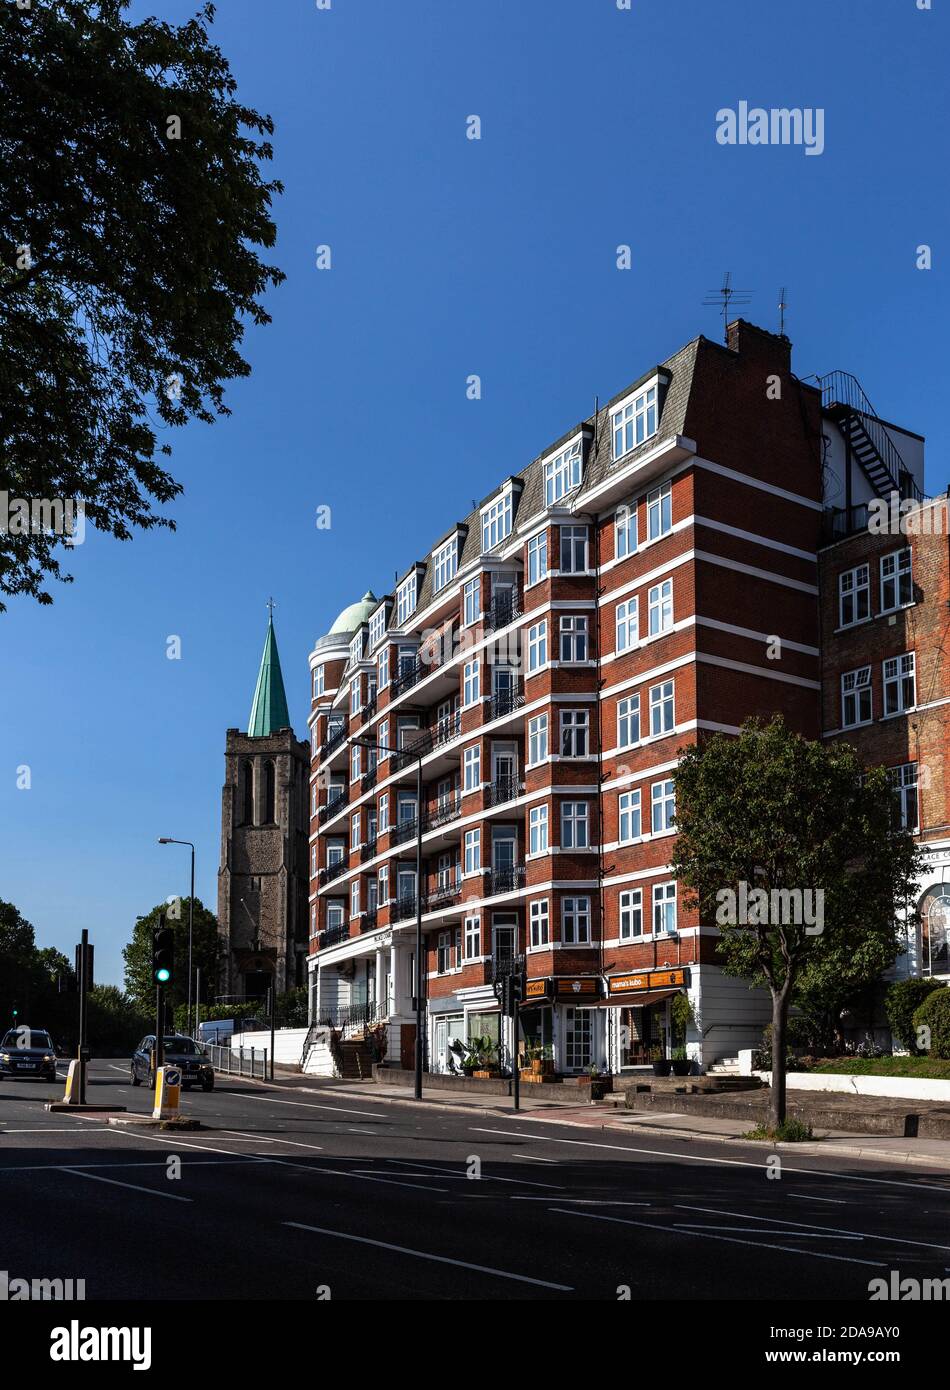 Front facades of buildings along Finchley Road, London, England, UK. Stock Photo